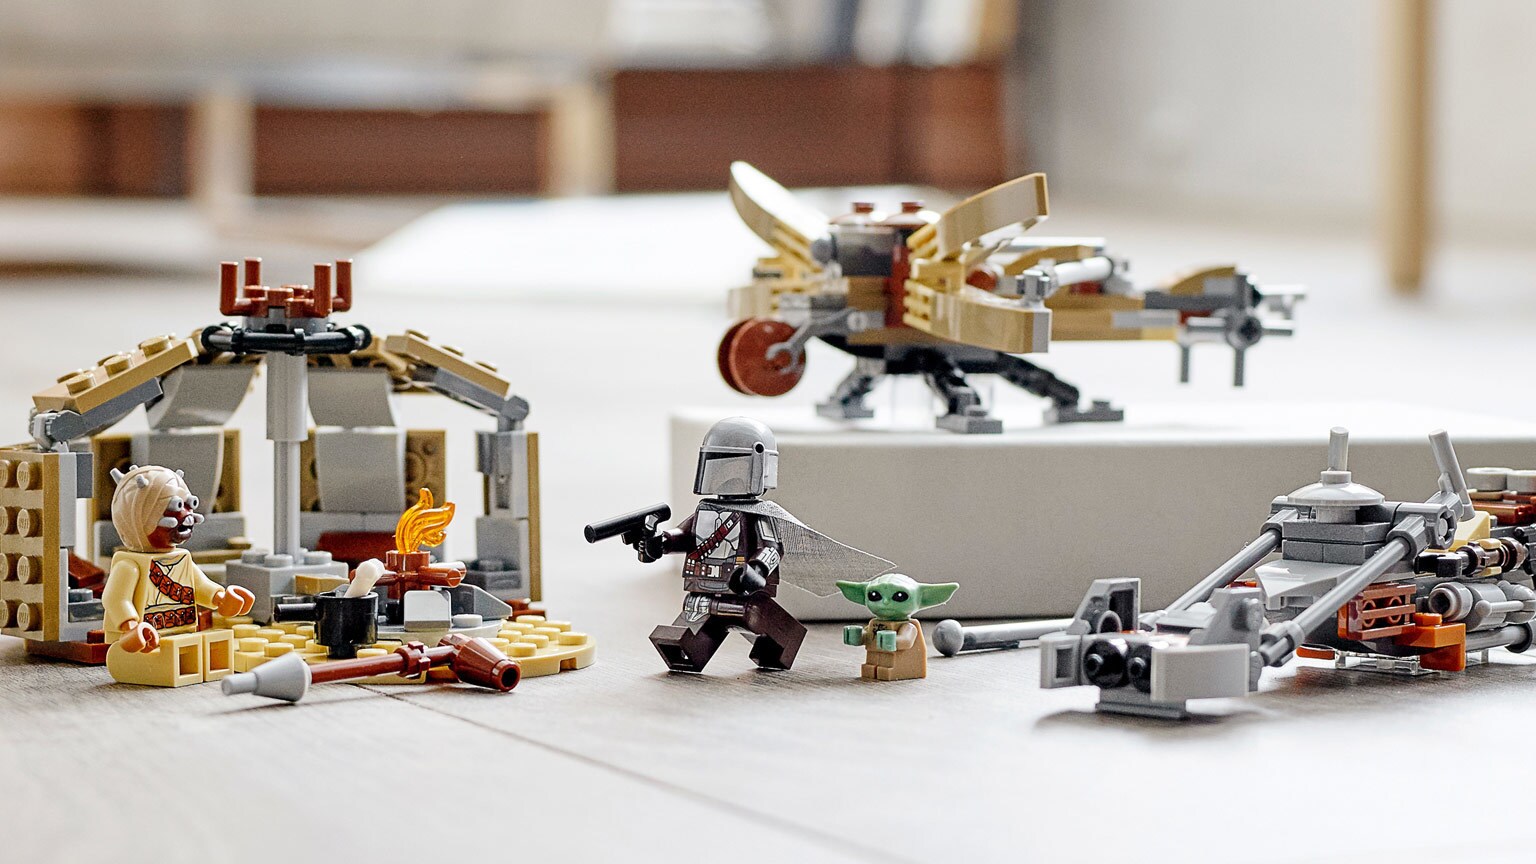 Mando and the Child Find “Trouble on Tatooine” in Fun New LEGO Star Wars Set